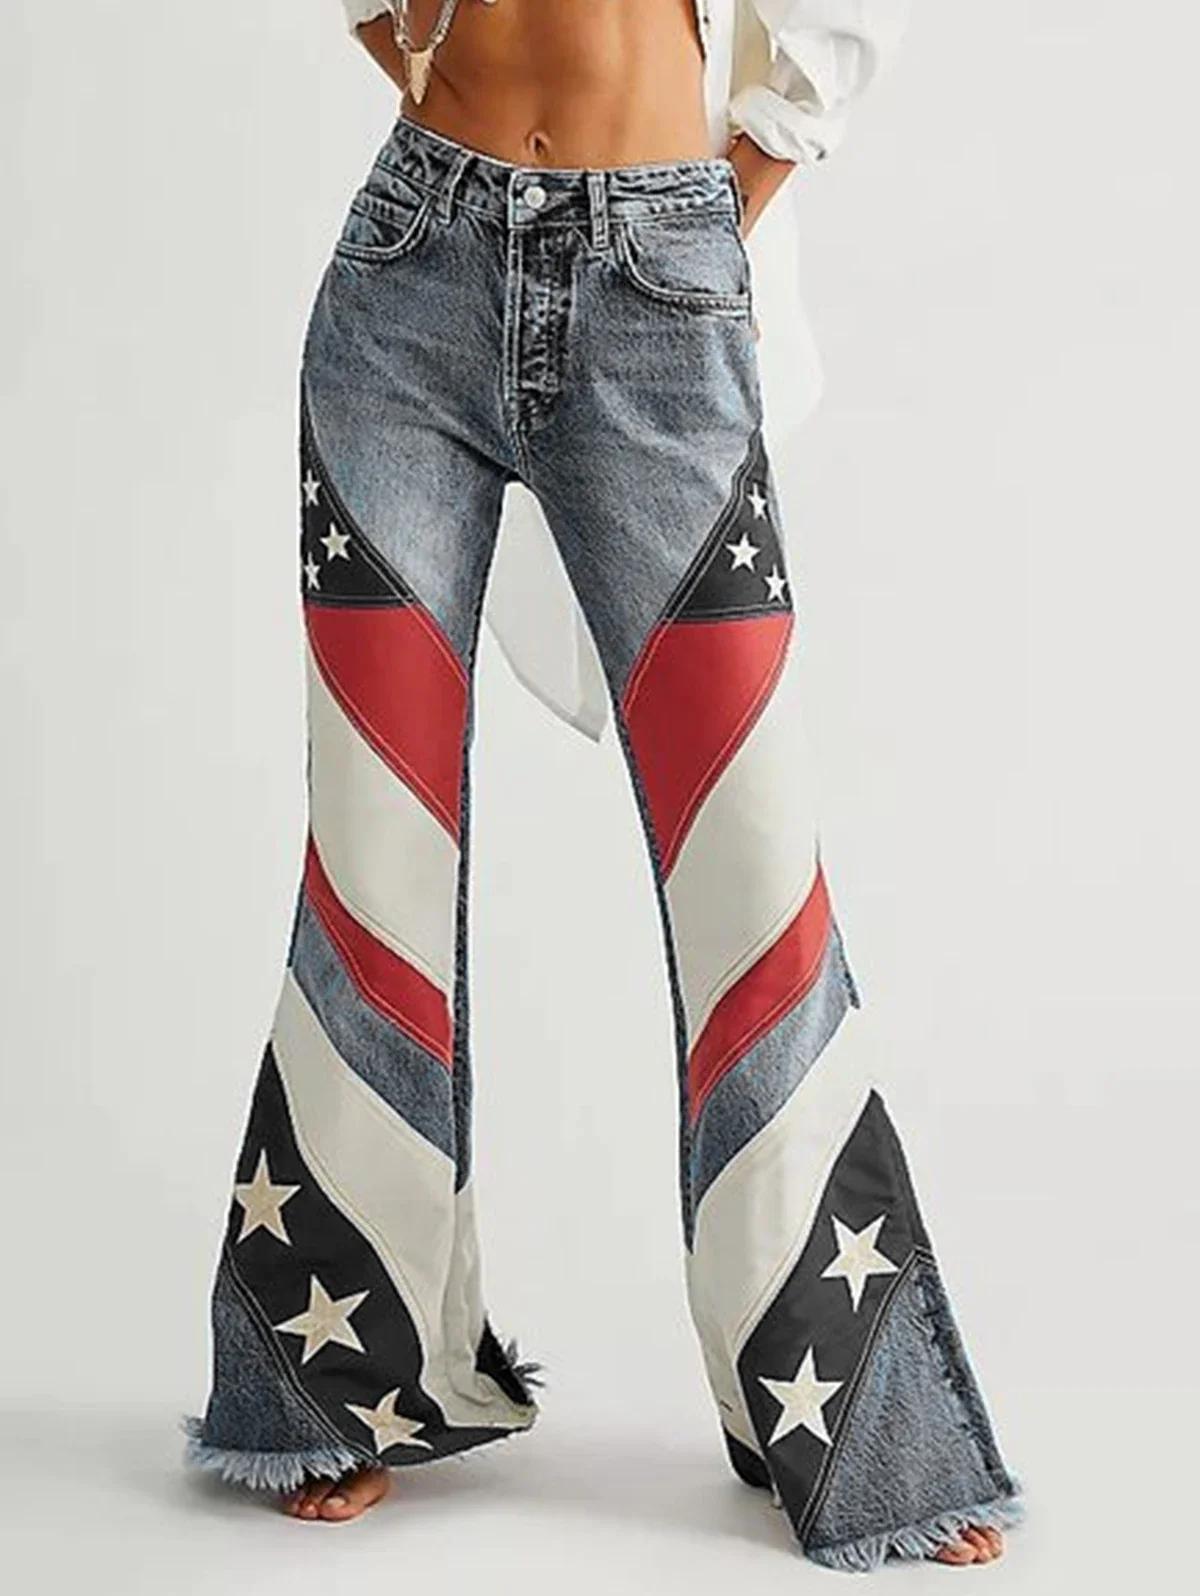 Women Jeans Fashion High Waist Vintage Flag Print Trousers Casual Denim Patchwork Washed Raw Trim Flare Leg Jeans New Arrival new arrival summer women harem pants all matched casual cotton denim pants elastic waist yellow white jeans